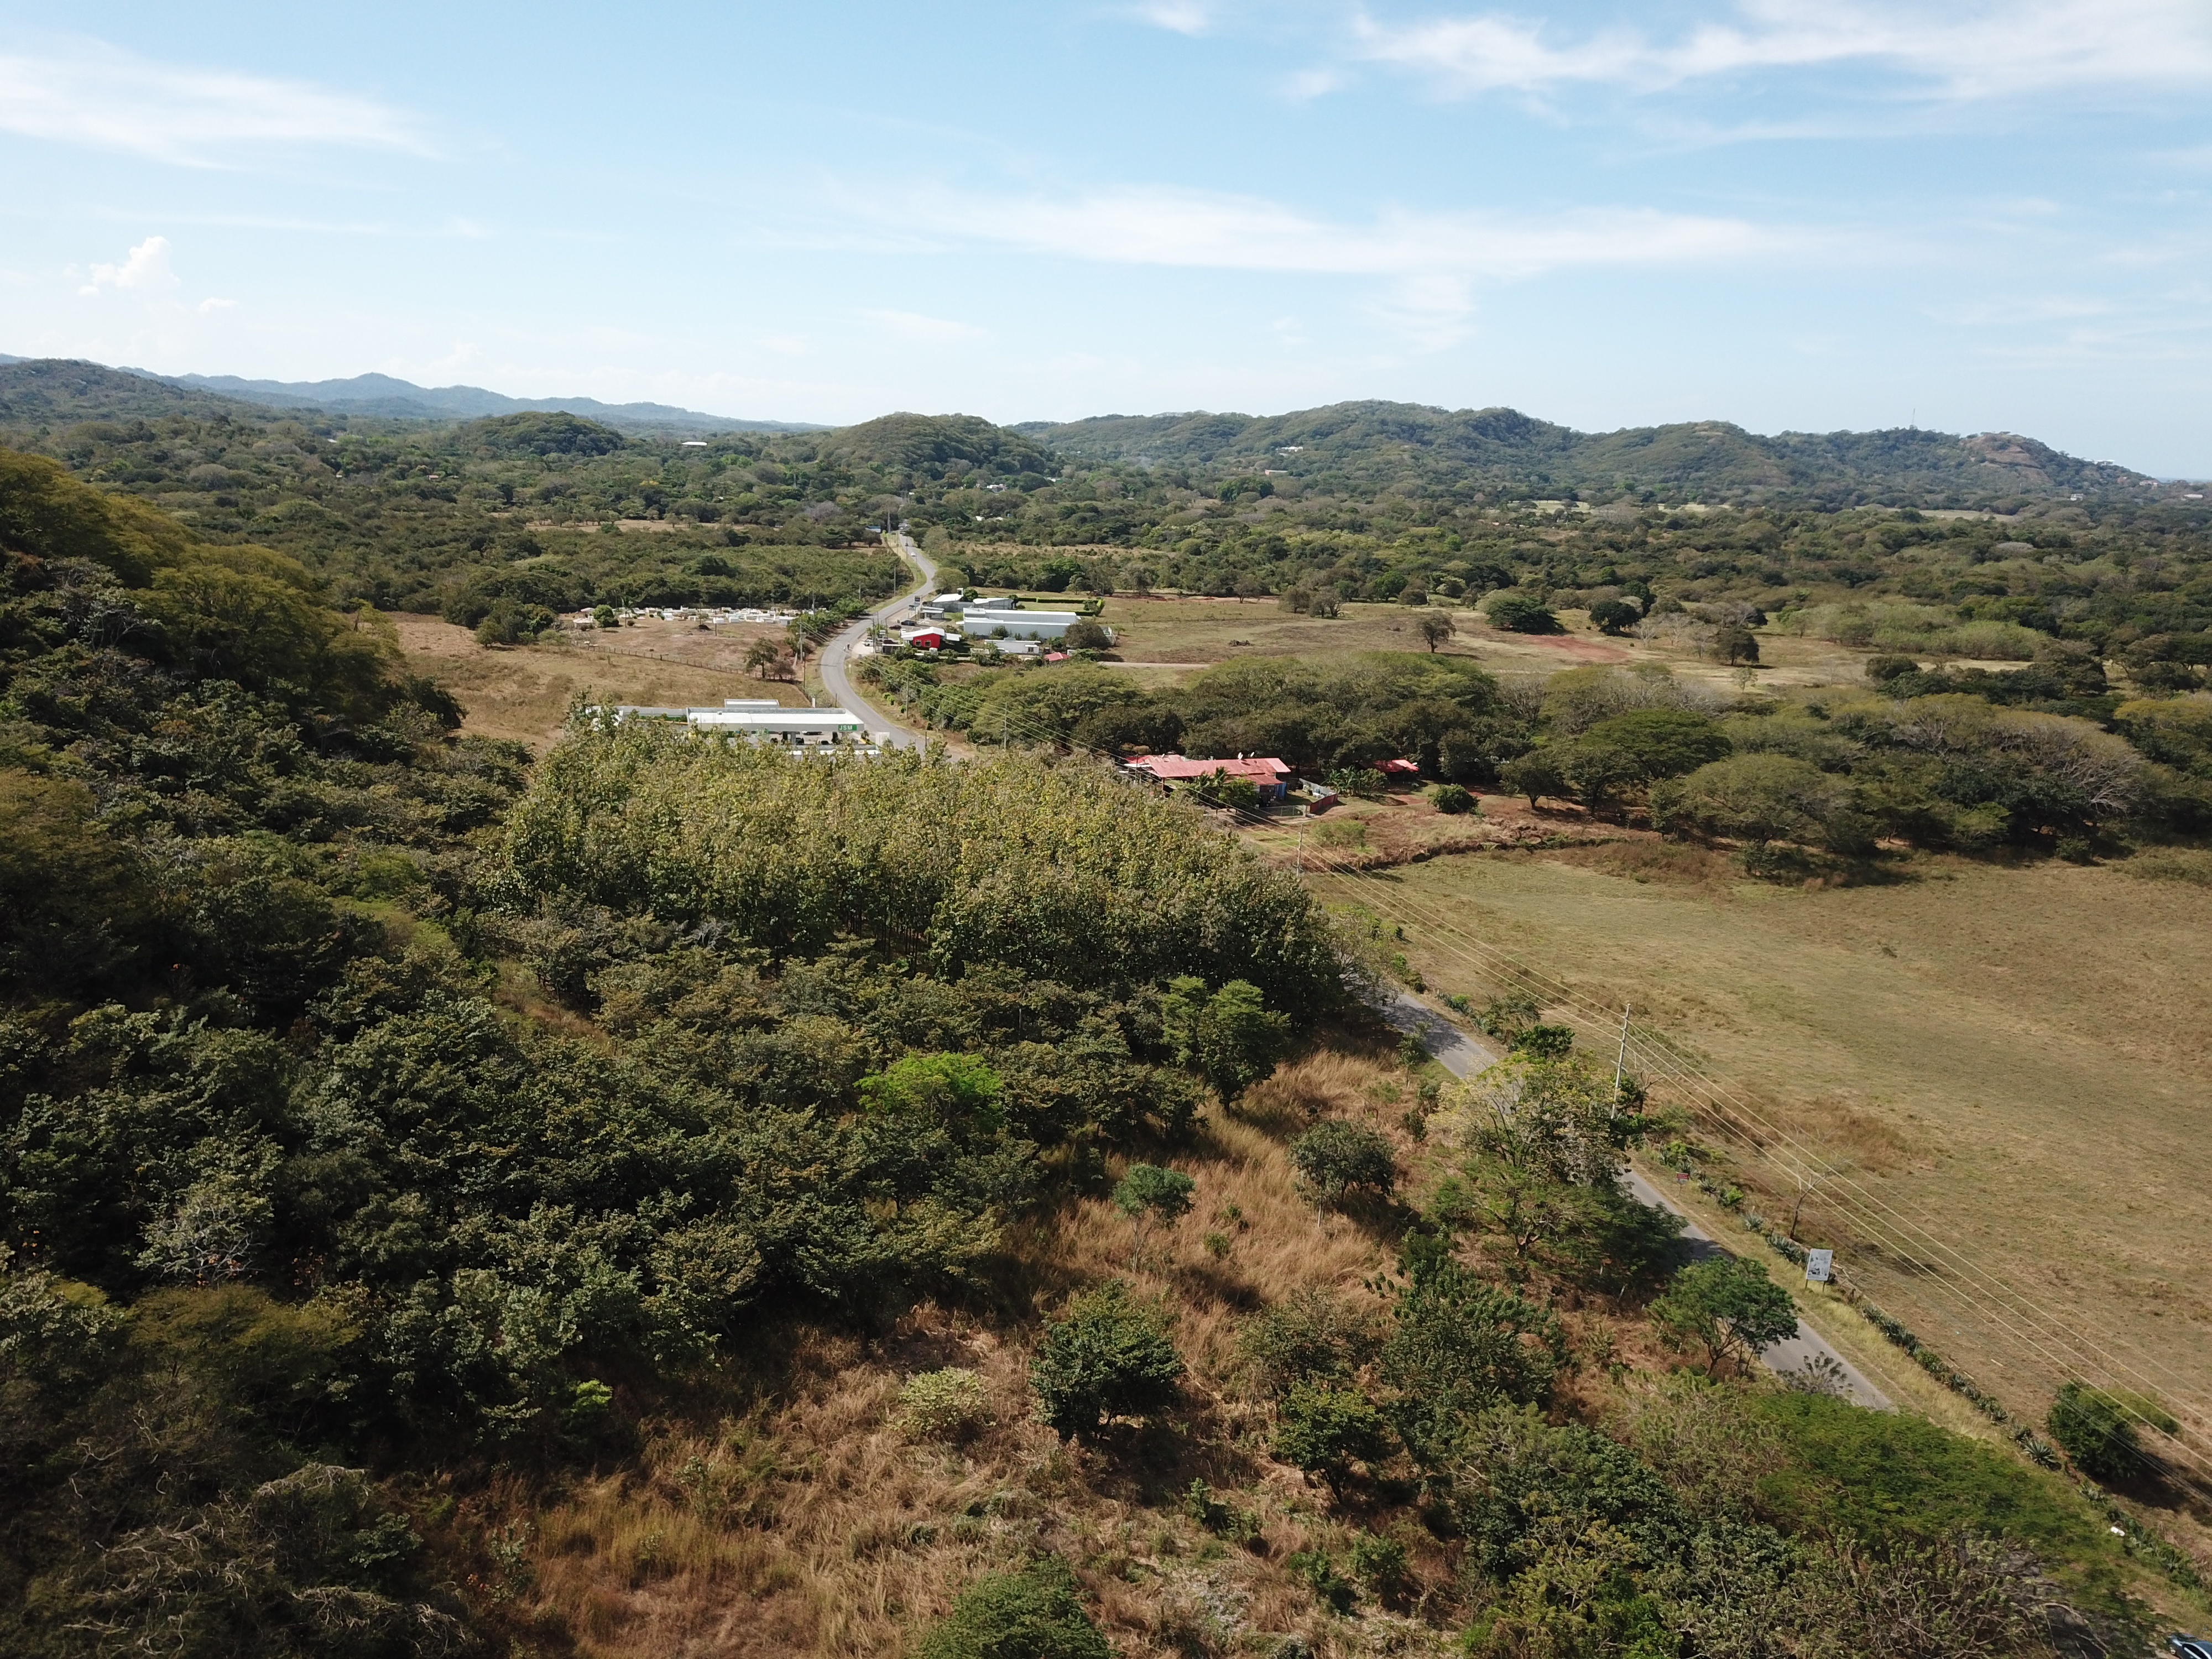 8000m2 Costa Rica real estate for sale in Villa Real-Tamarindo, the best property to start anew